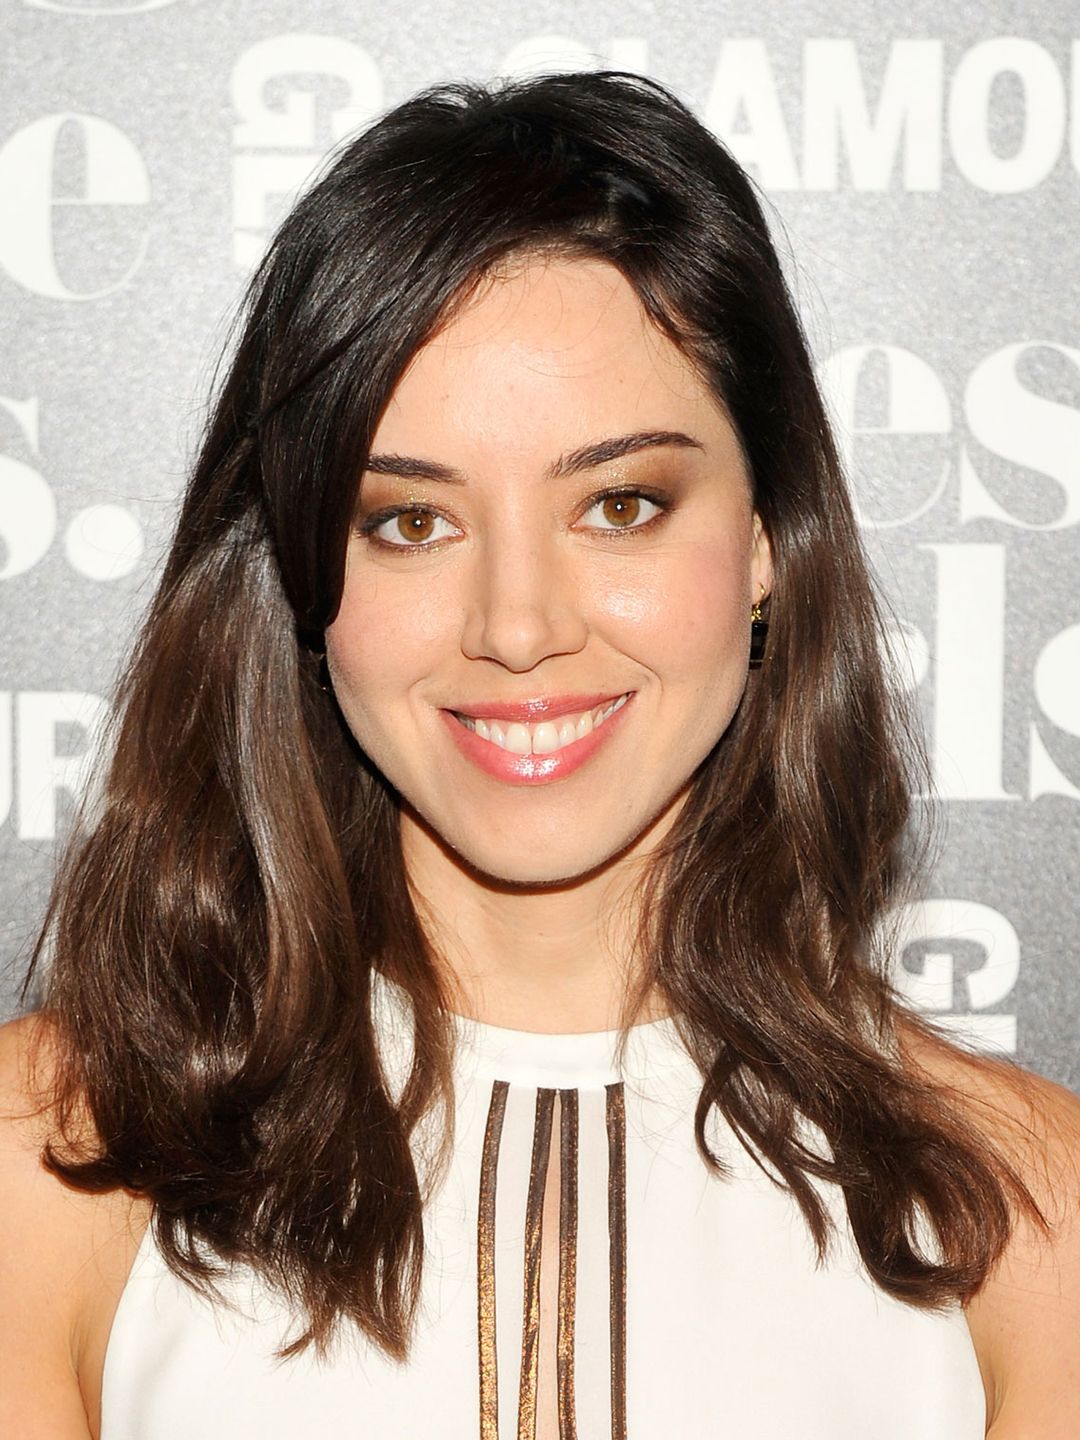 Aubrey Plaza how old is she